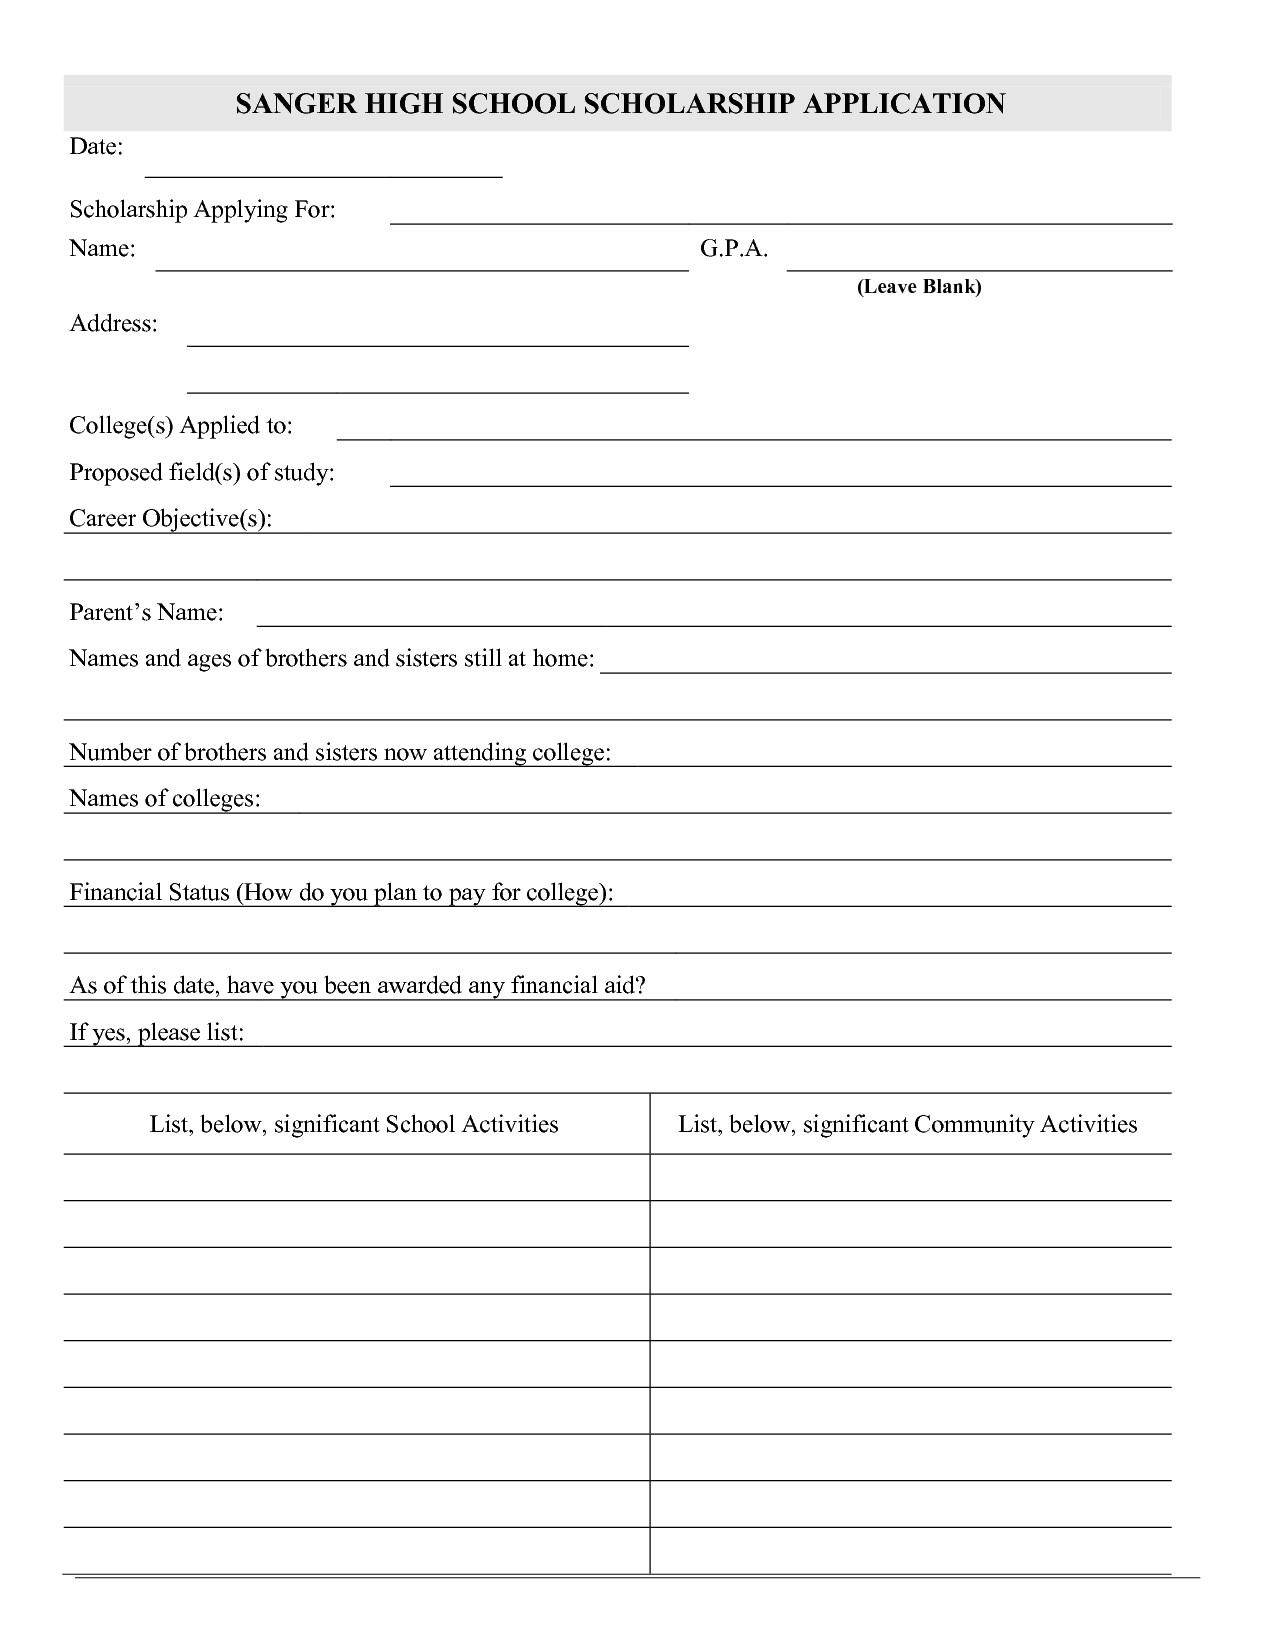 contest entry forms template blank Gagnatashort